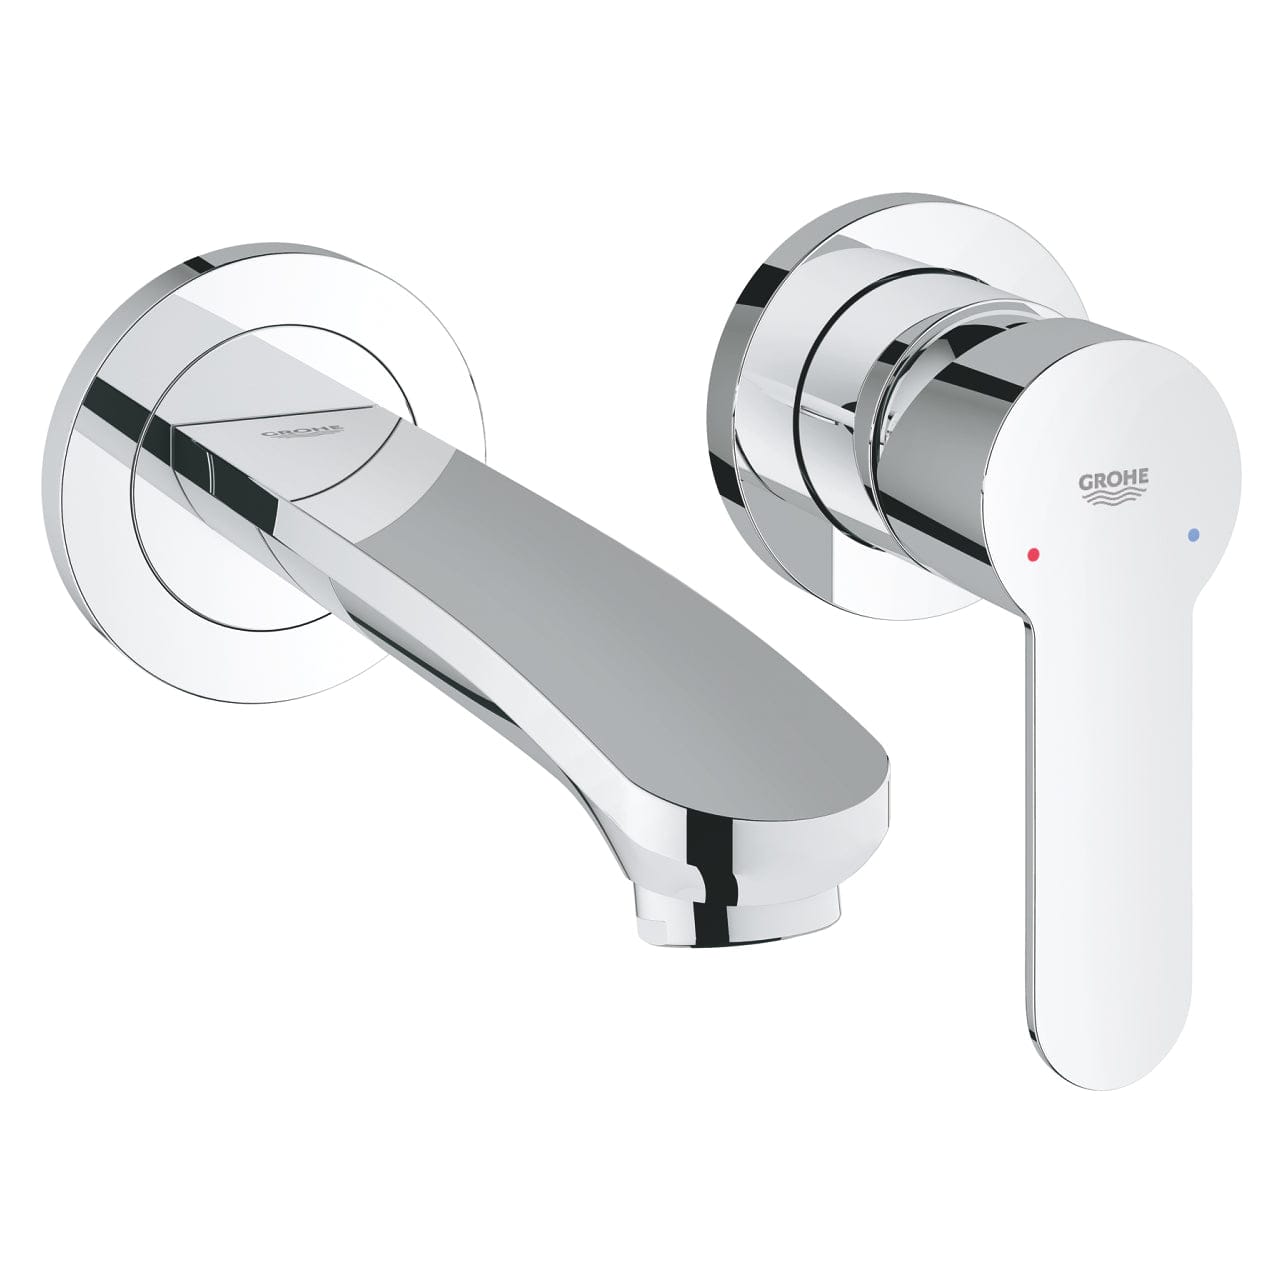 Grohe Eurostyle Cosmopolitan 2-hole basin mixer S-Size, Chrome | Supply Master | Accra, Ghana Bathroom Faucet Buy Tools hardware Building materials